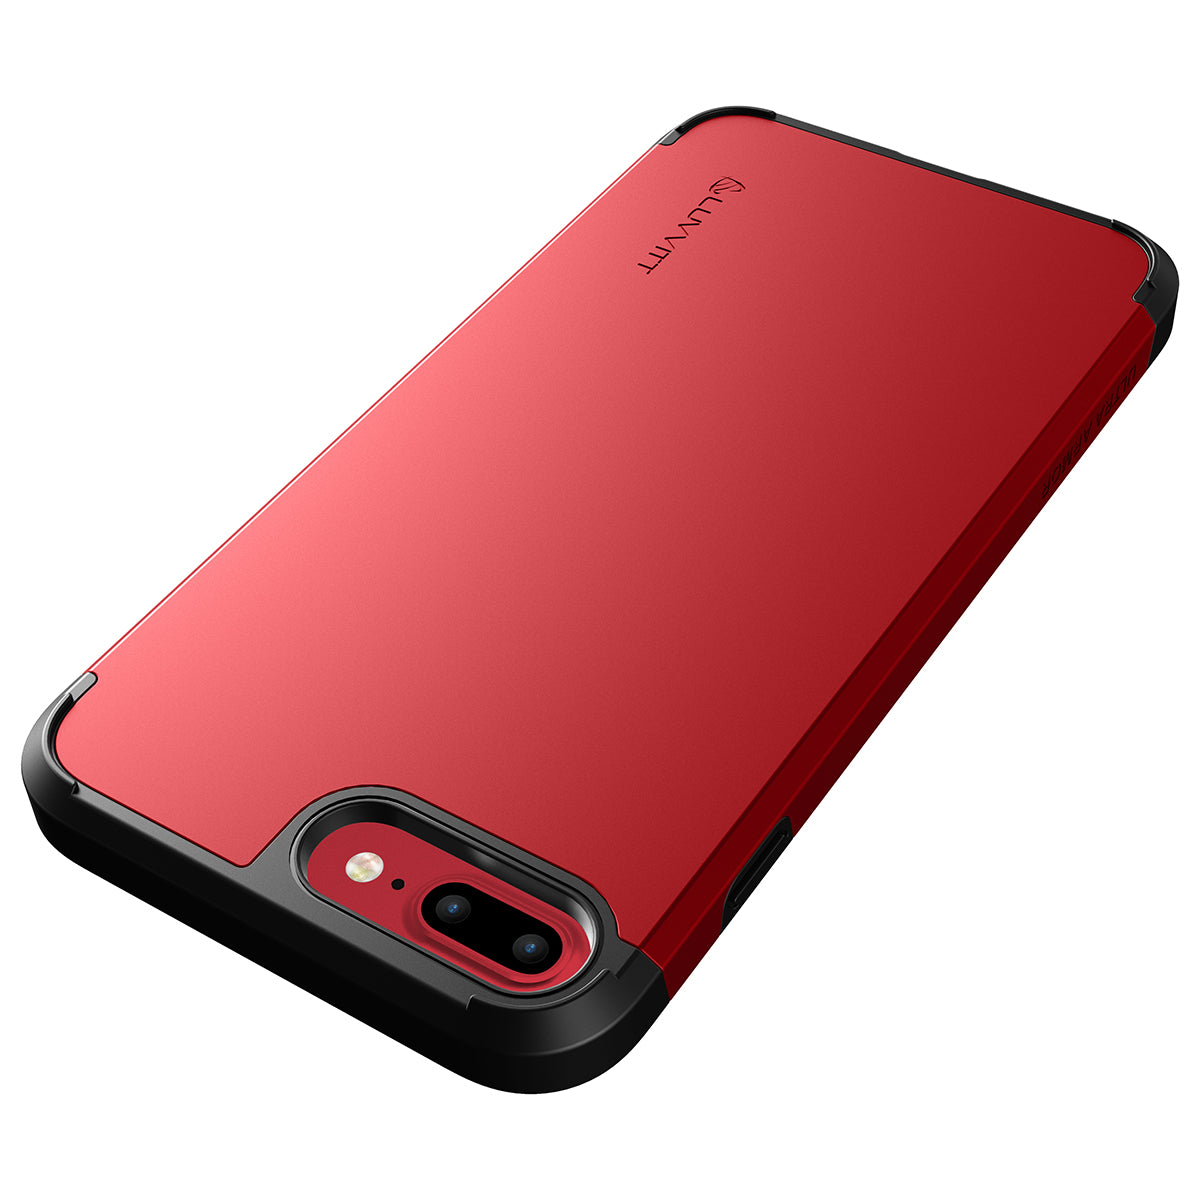 Luvvitt Ultra Armor Dual Layer Case for iPhone 8 Plus - Red